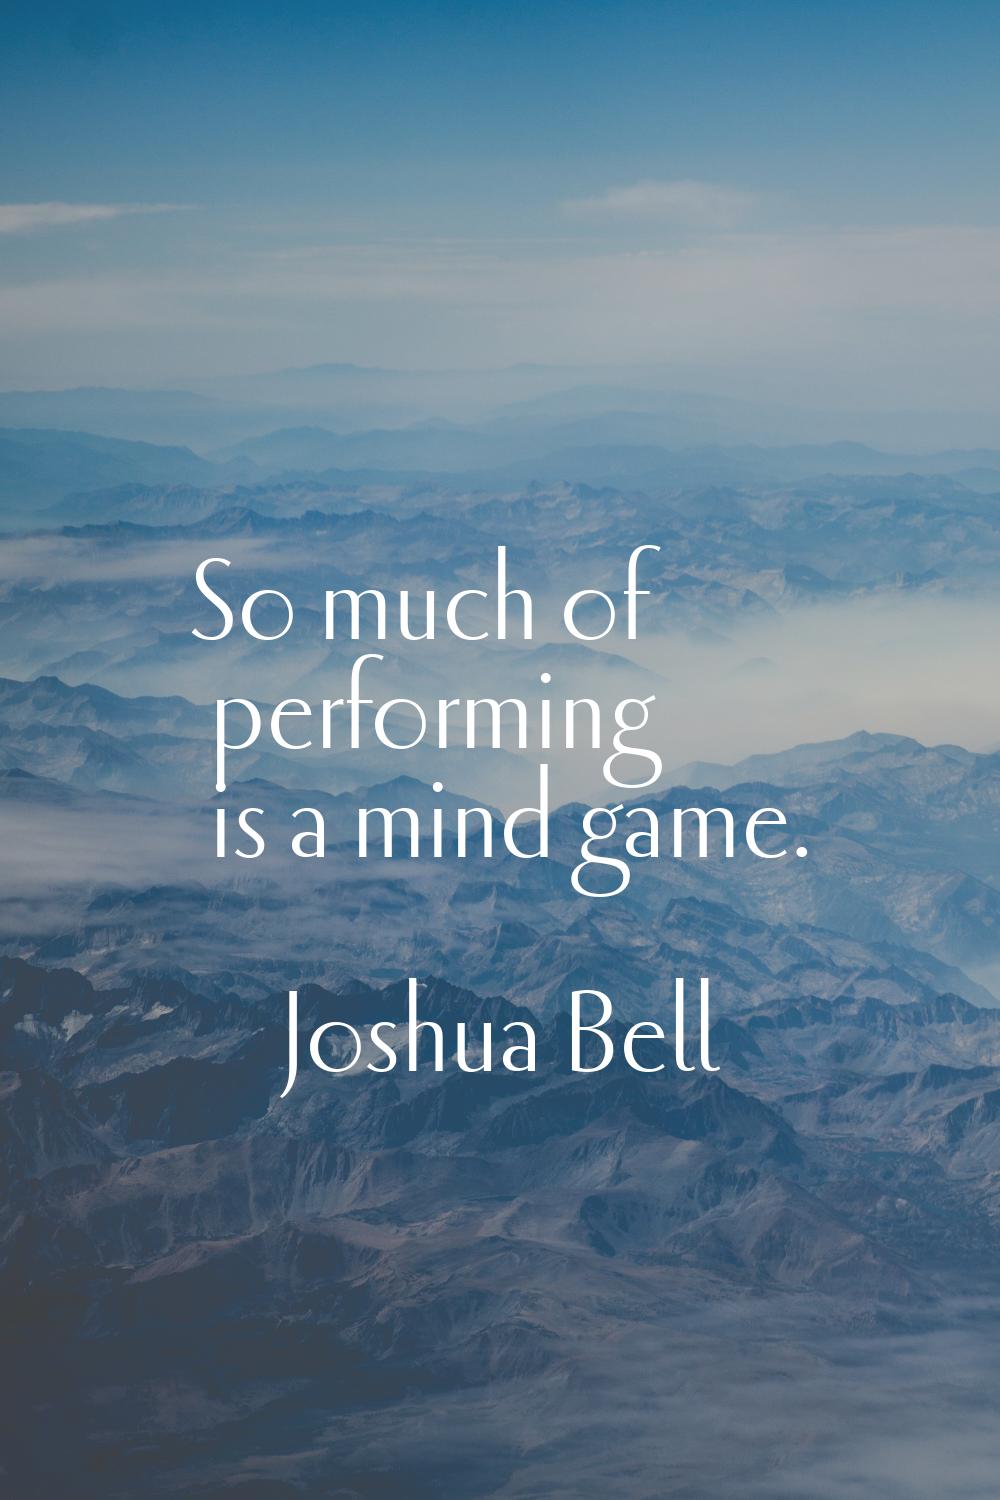 So much of performing is a mind game.